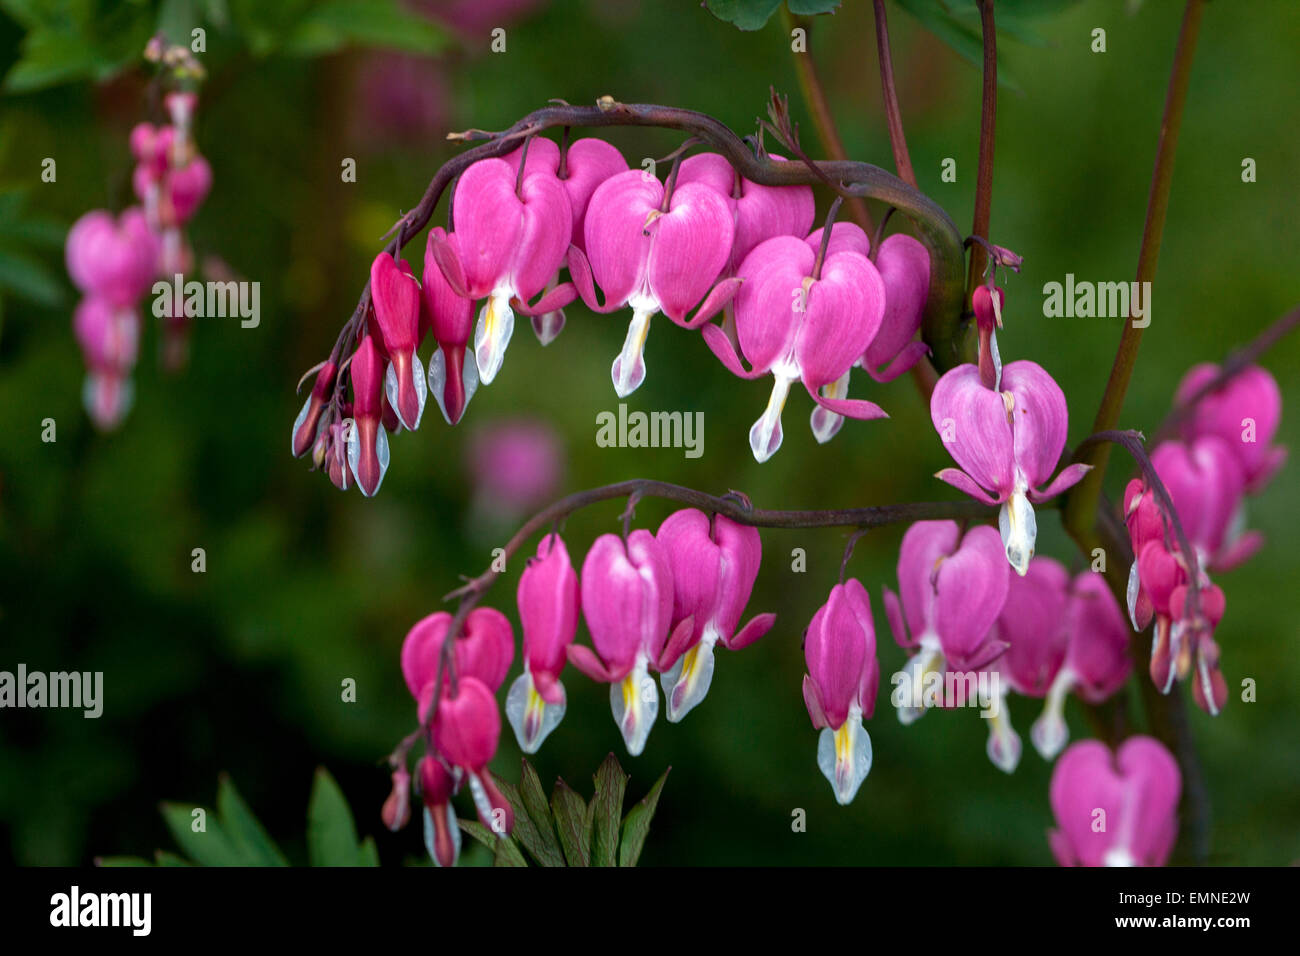 Lamprocapnos spectabilis pink flowers Bleeding Hearts Dicentra spectabilis arching blooming Stock Photo